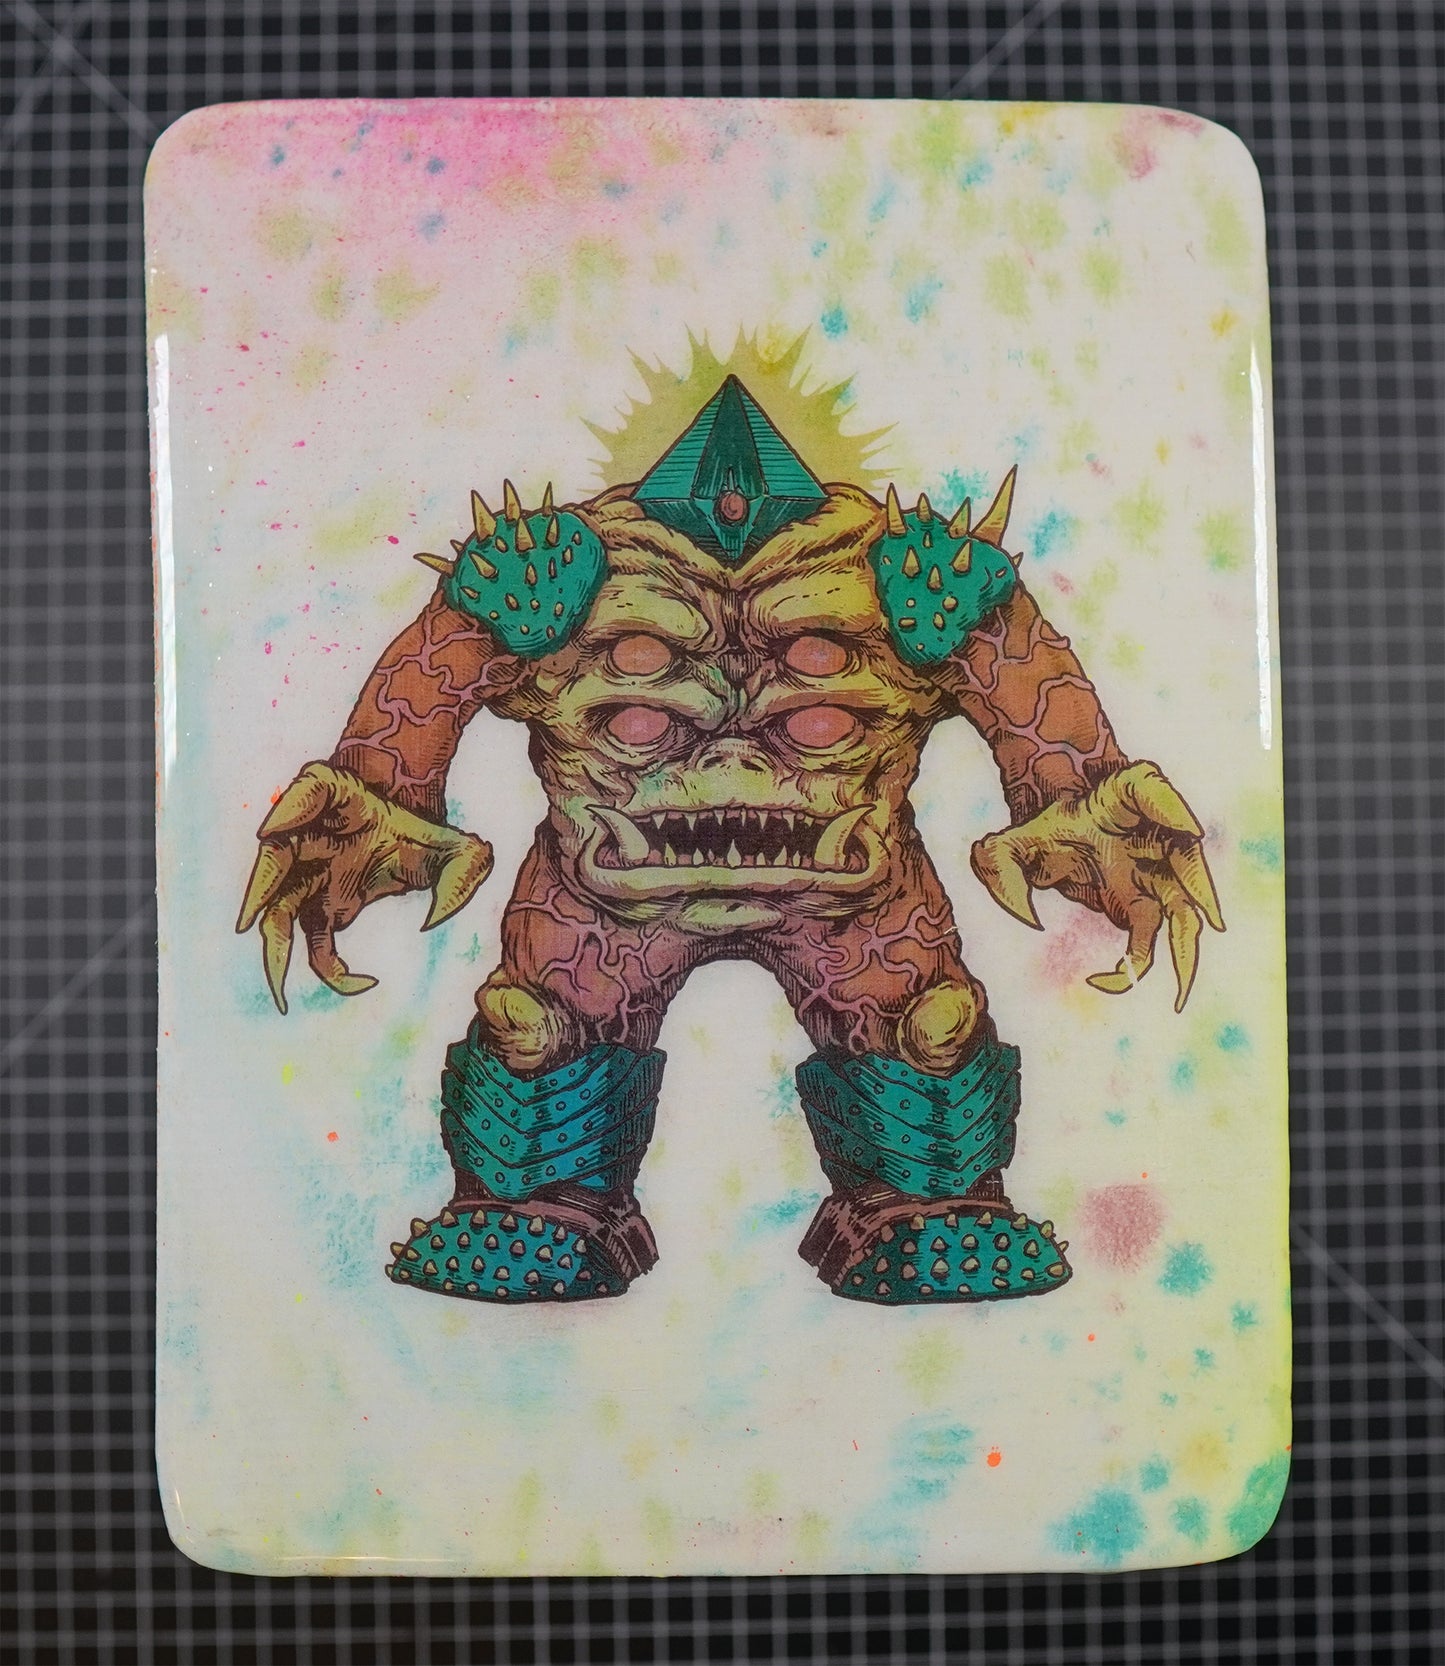 GALAXY FIGHTERS: The Crystal Goblin - Wood Transfer